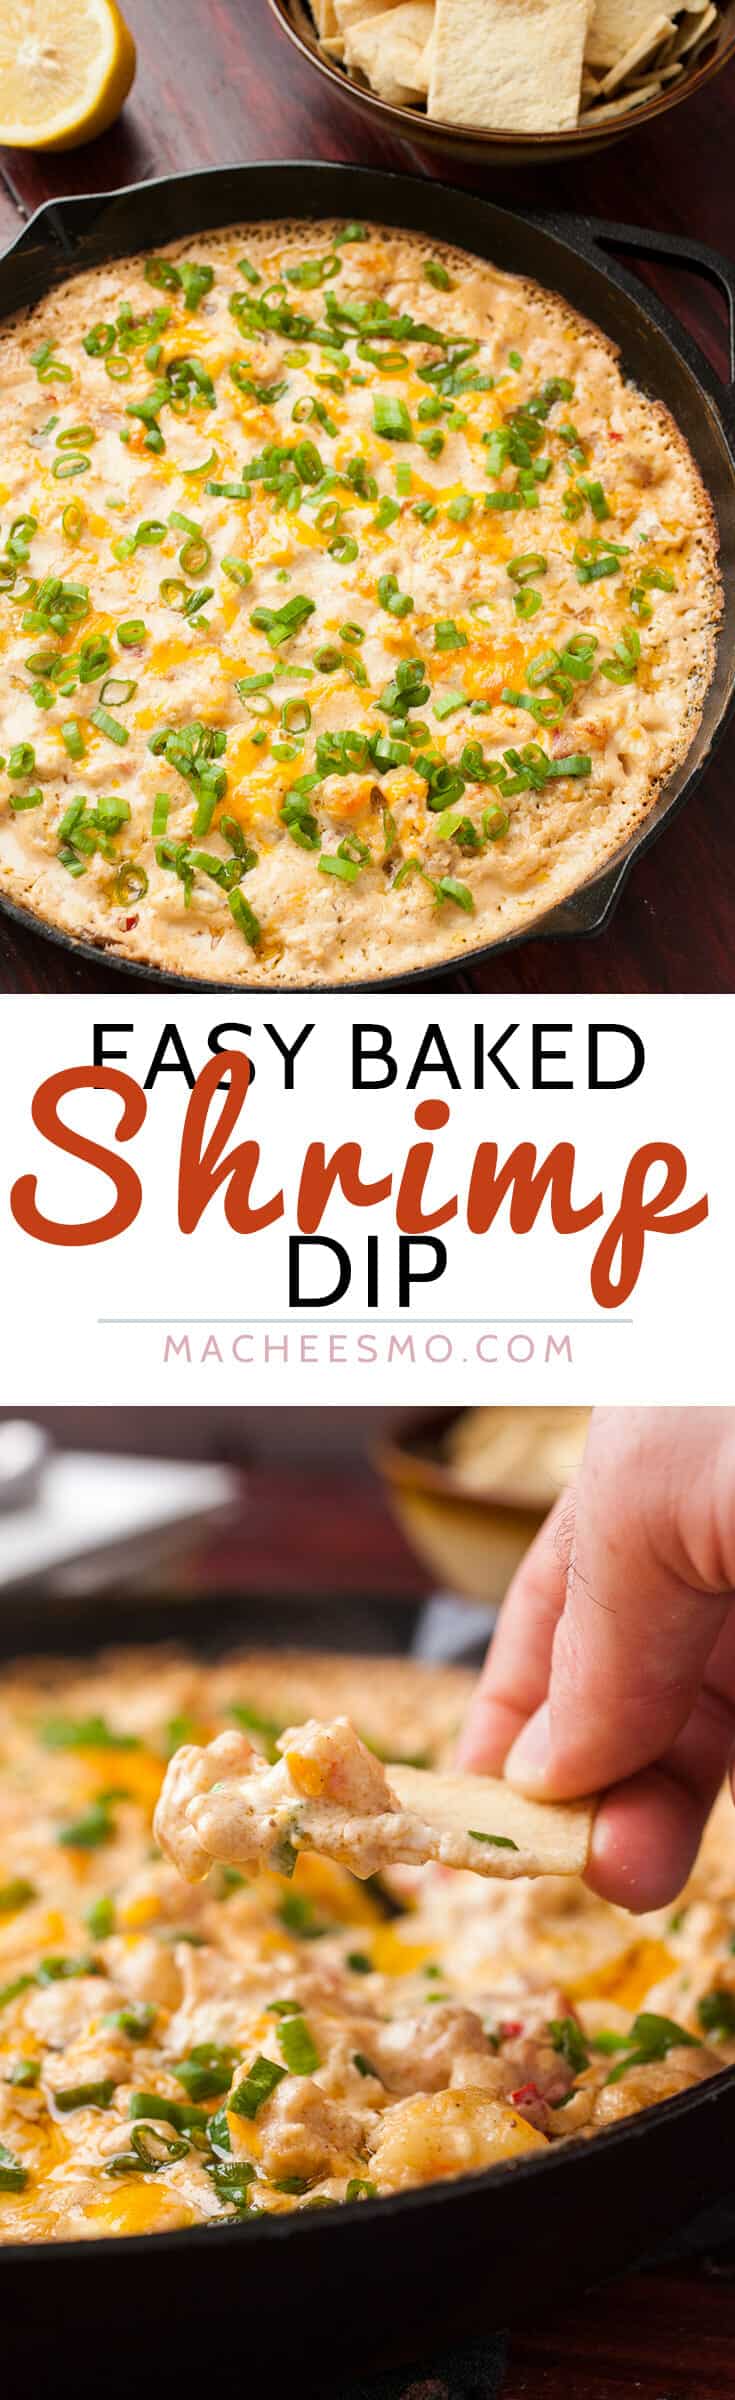 Easy Baked Shrimp Dip: This baked shrimp dip is the perfect warm appetizer. Fresh shrimp baked together with peppers, spices, and some cheese makes for and easy and irresistible appetizer! I baked and served my version right in my cast iron skillet! | macheesmo.com